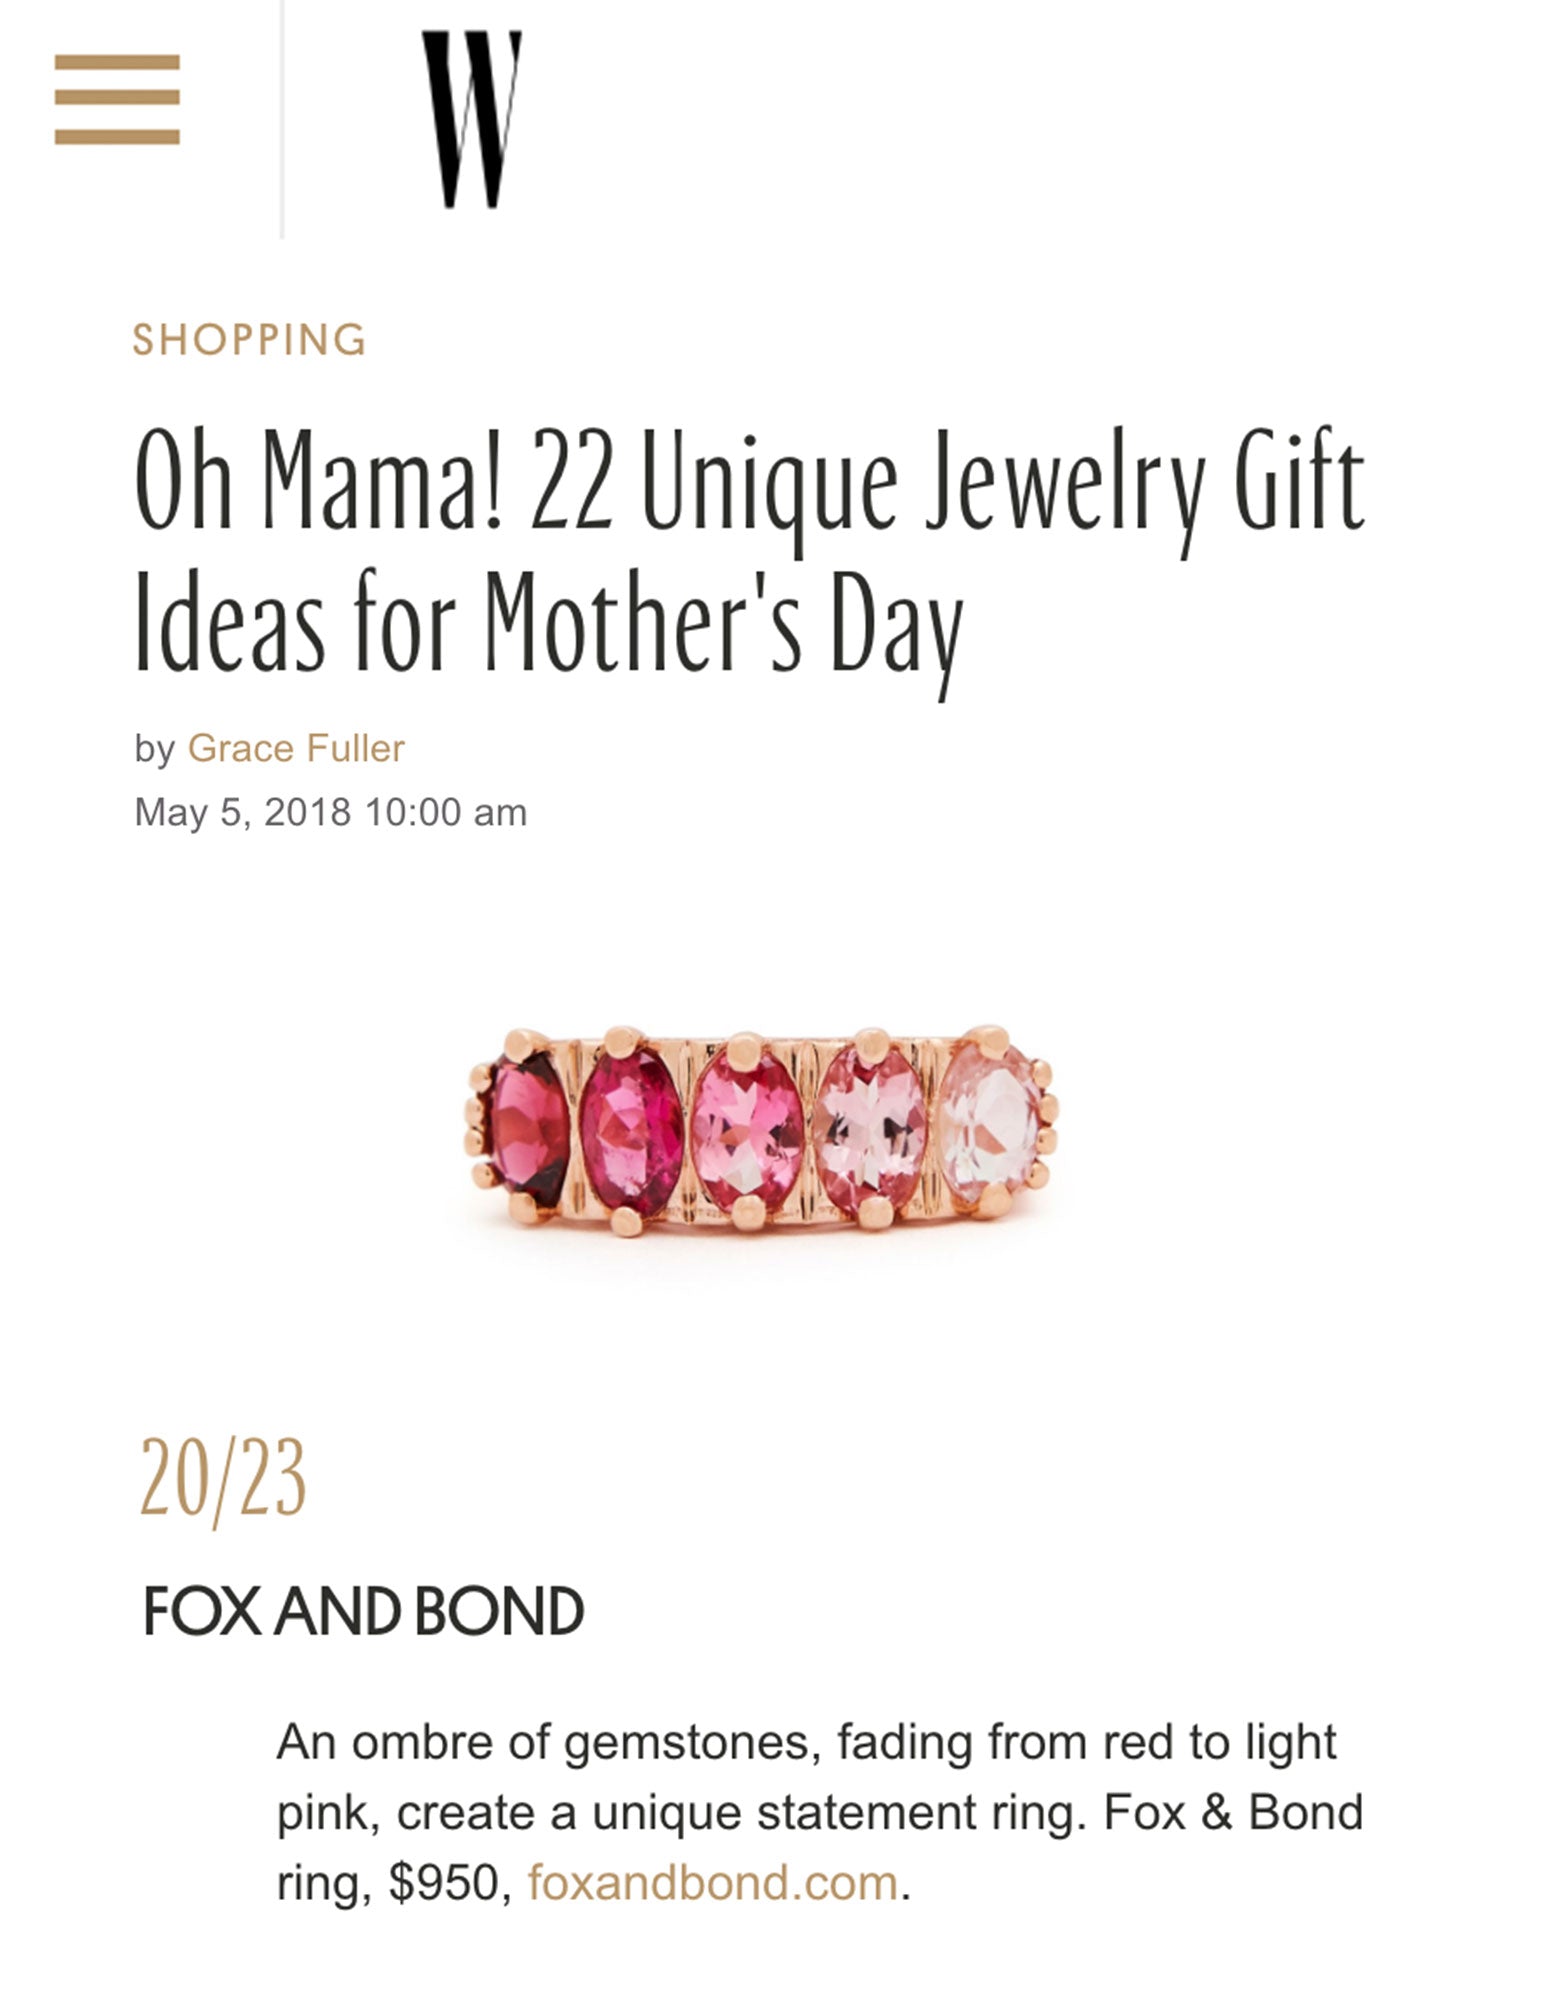 WMagazine.com: 22 Unique Jewelry Gift Ideas for Mother's Day